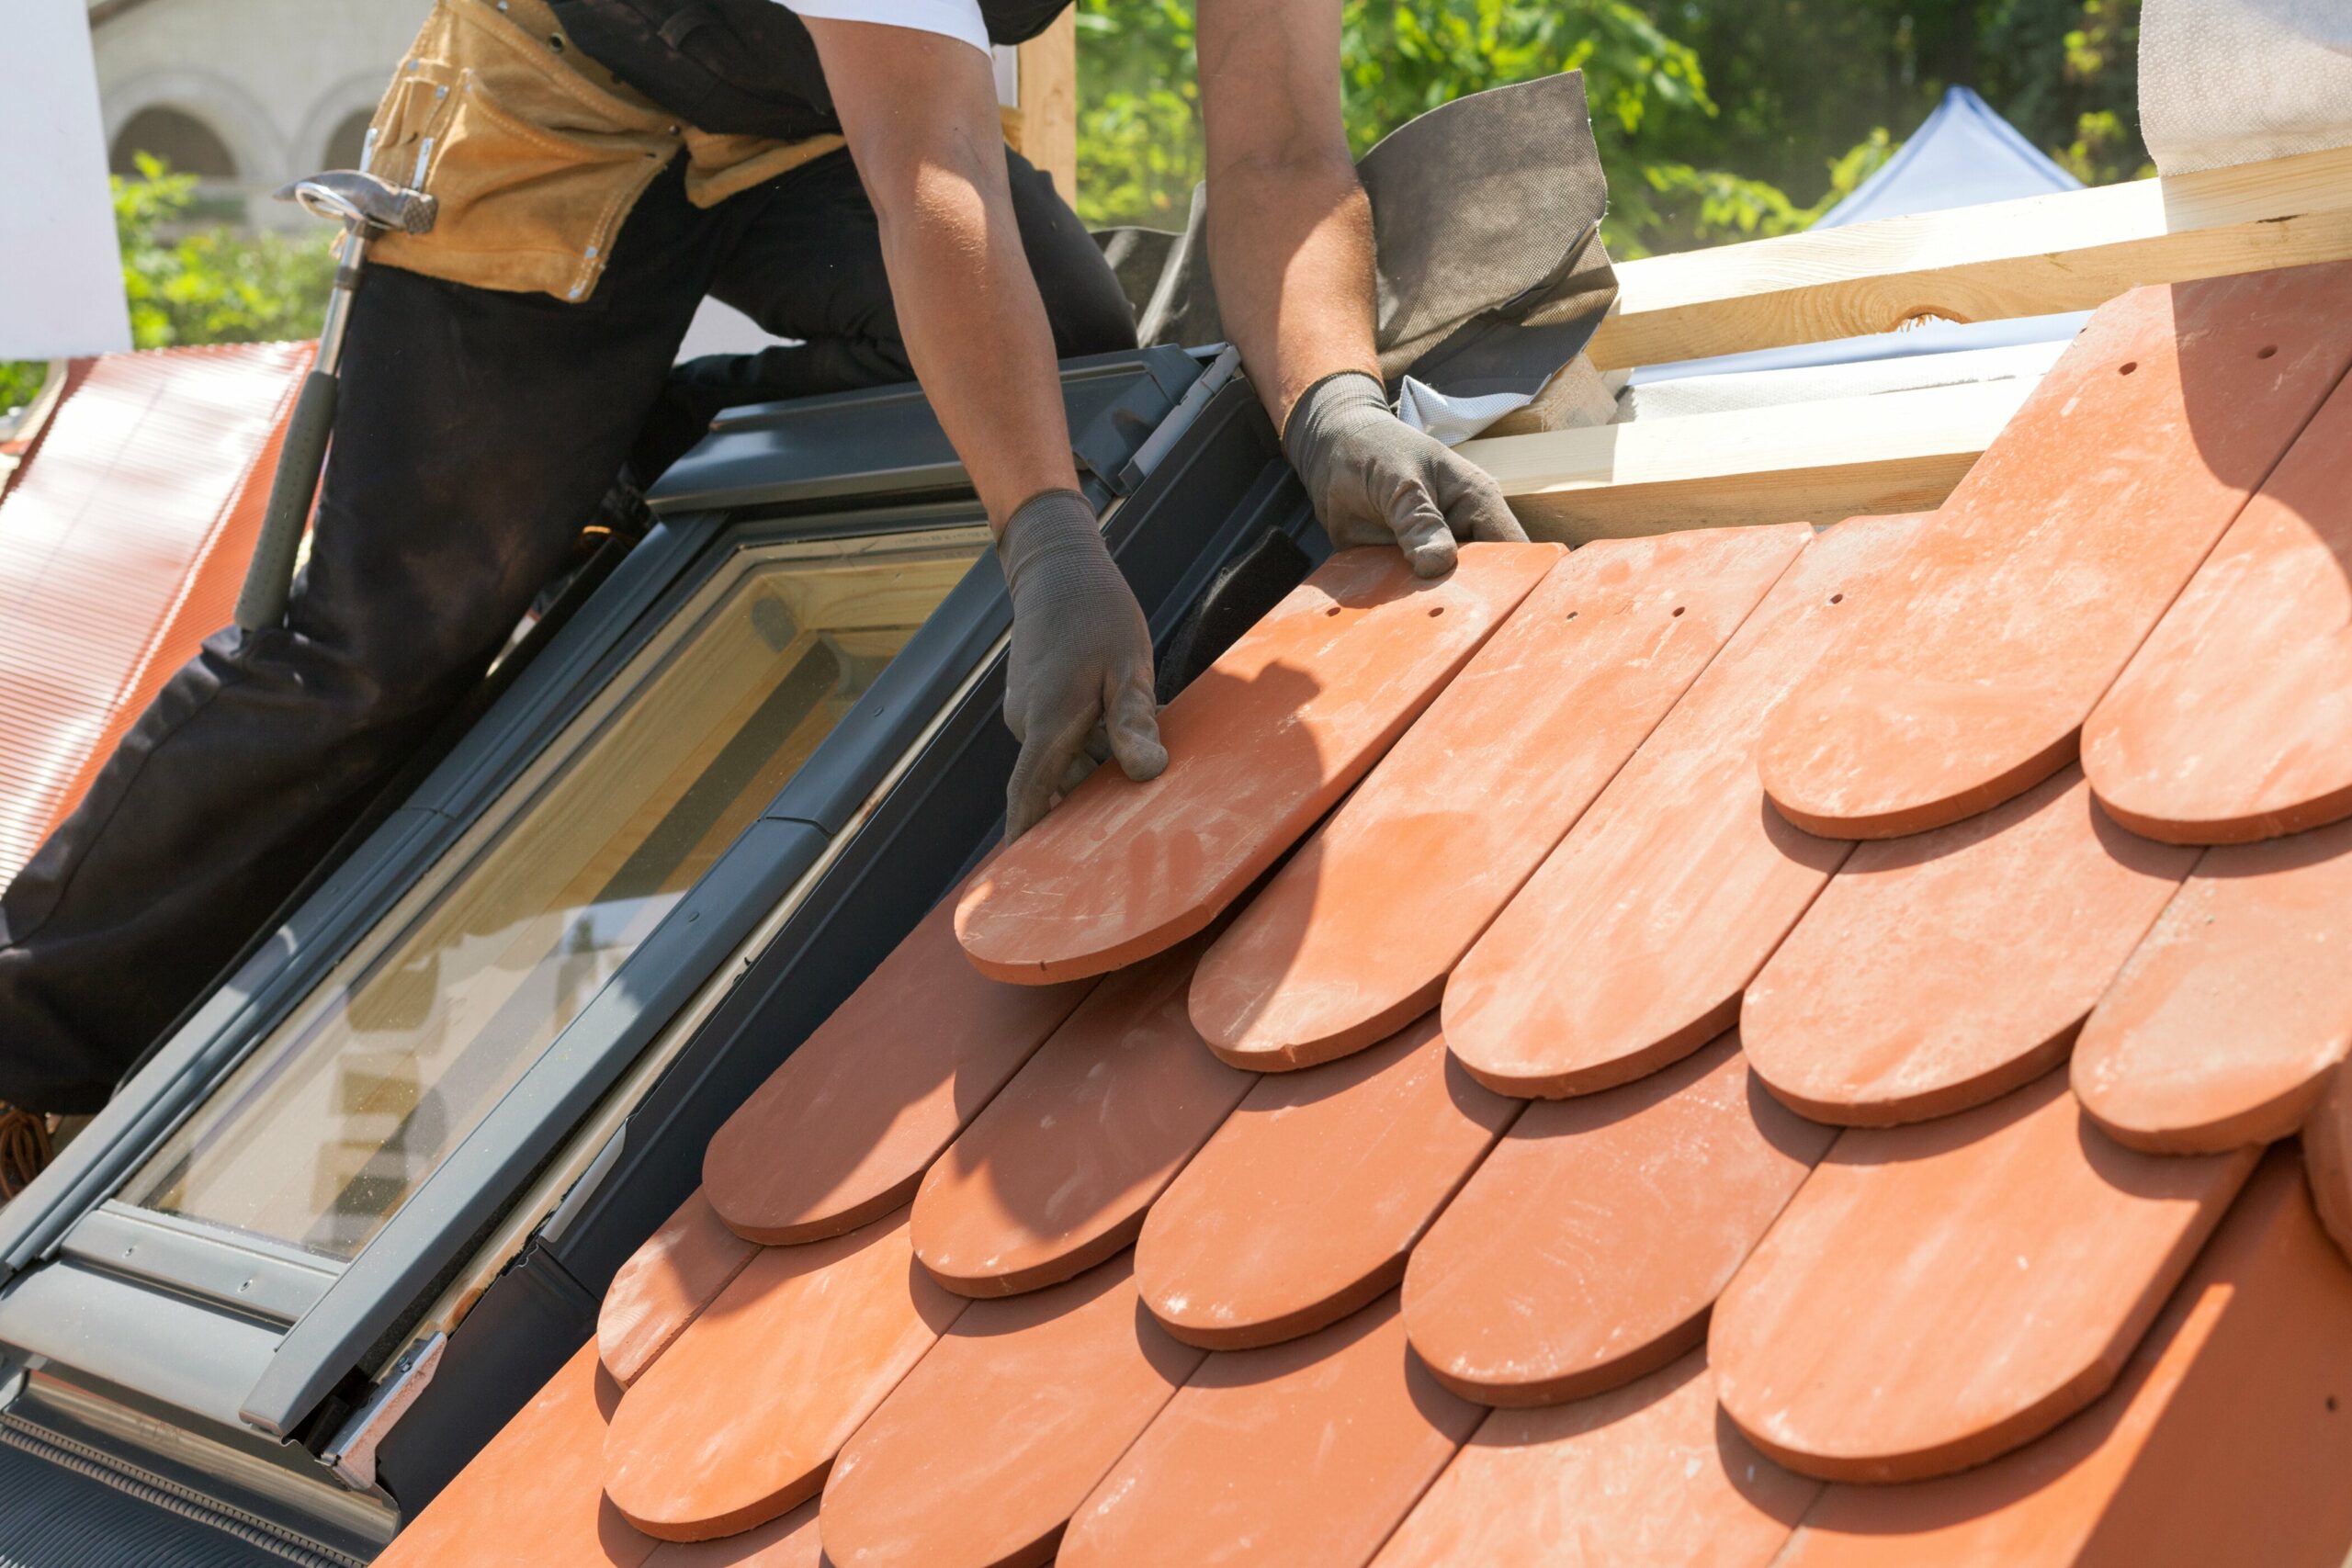 roofer putting on new roof tiles